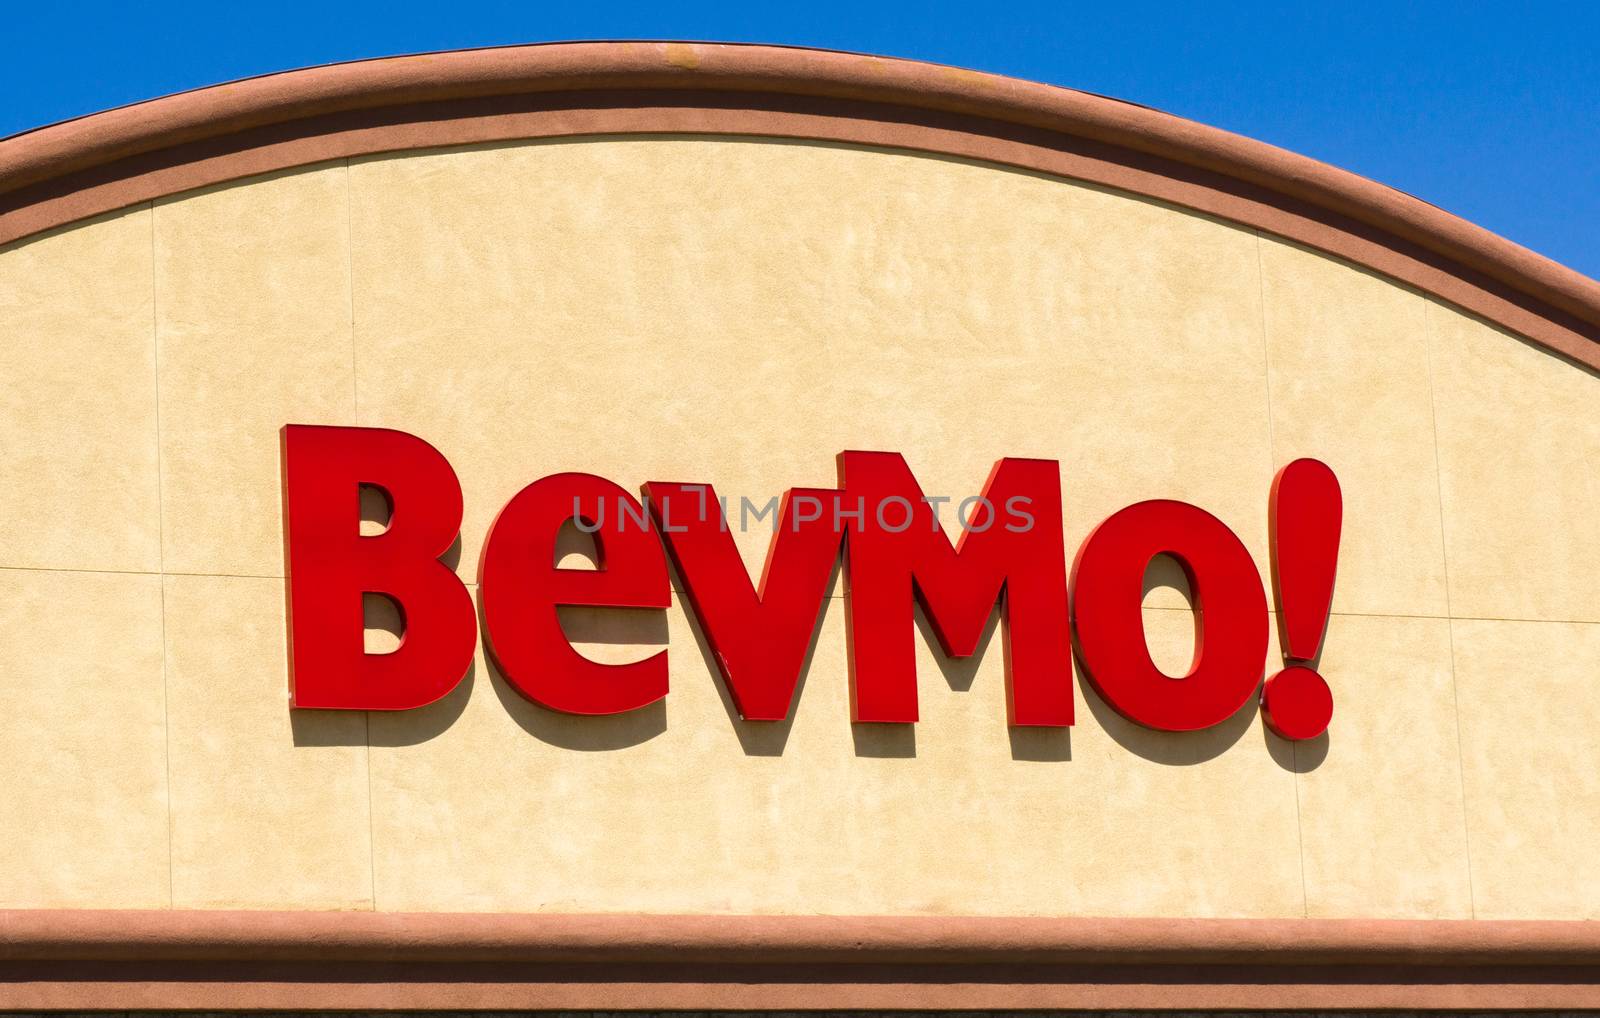 Bevmo Retail Store Exterior and Sign by wolterk